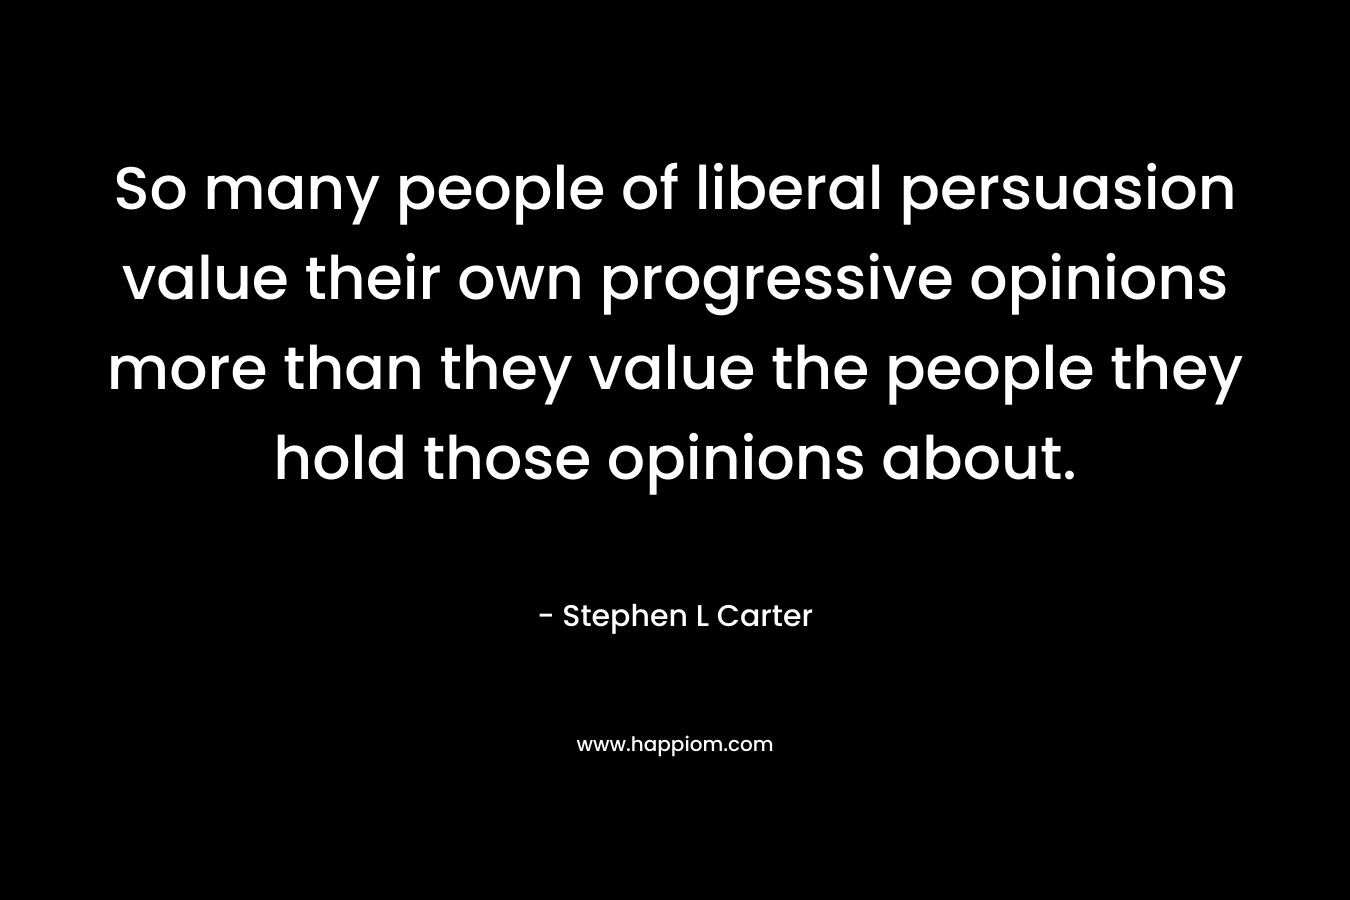 So many people of liberal persuasion value their own progressive opinions more than they value the people they hold those opinions about.